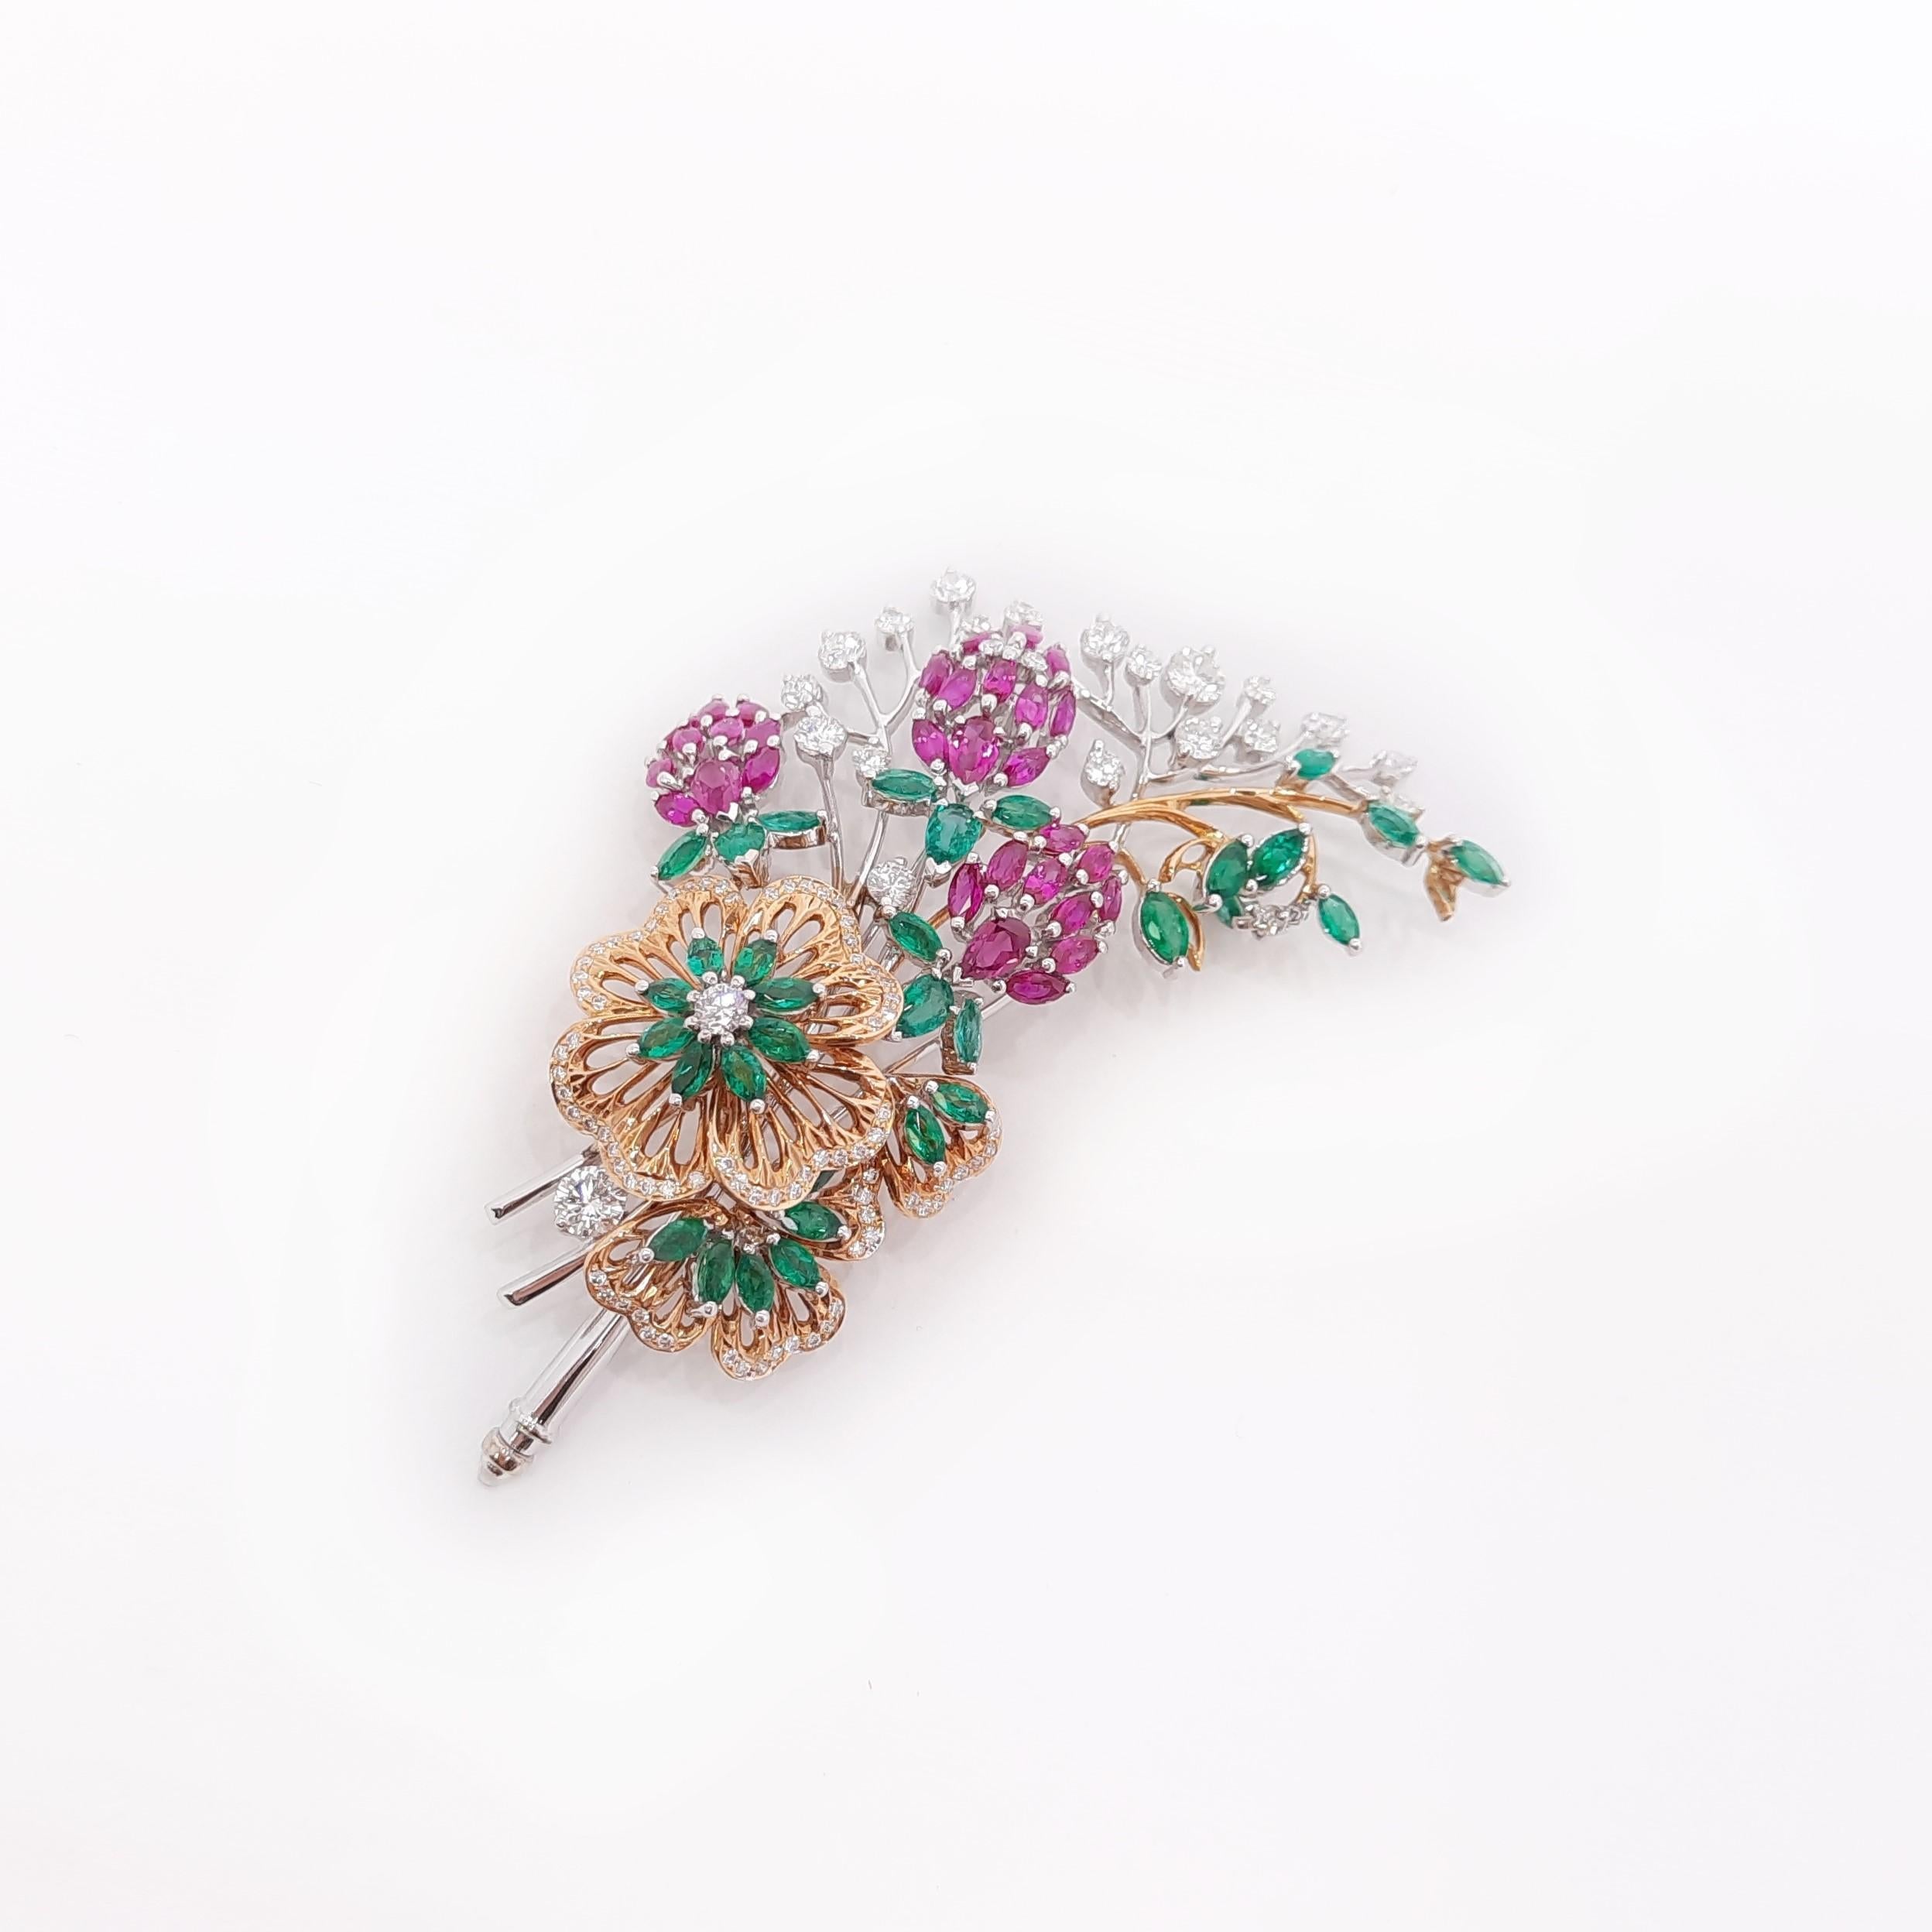 The tradition of making floral compositions with precious metals and stones had been popular since the middle of the 19th century in Russia and Europe.
Flower miniatures made by the best jewellers of the time decorated houses  and dresses of the